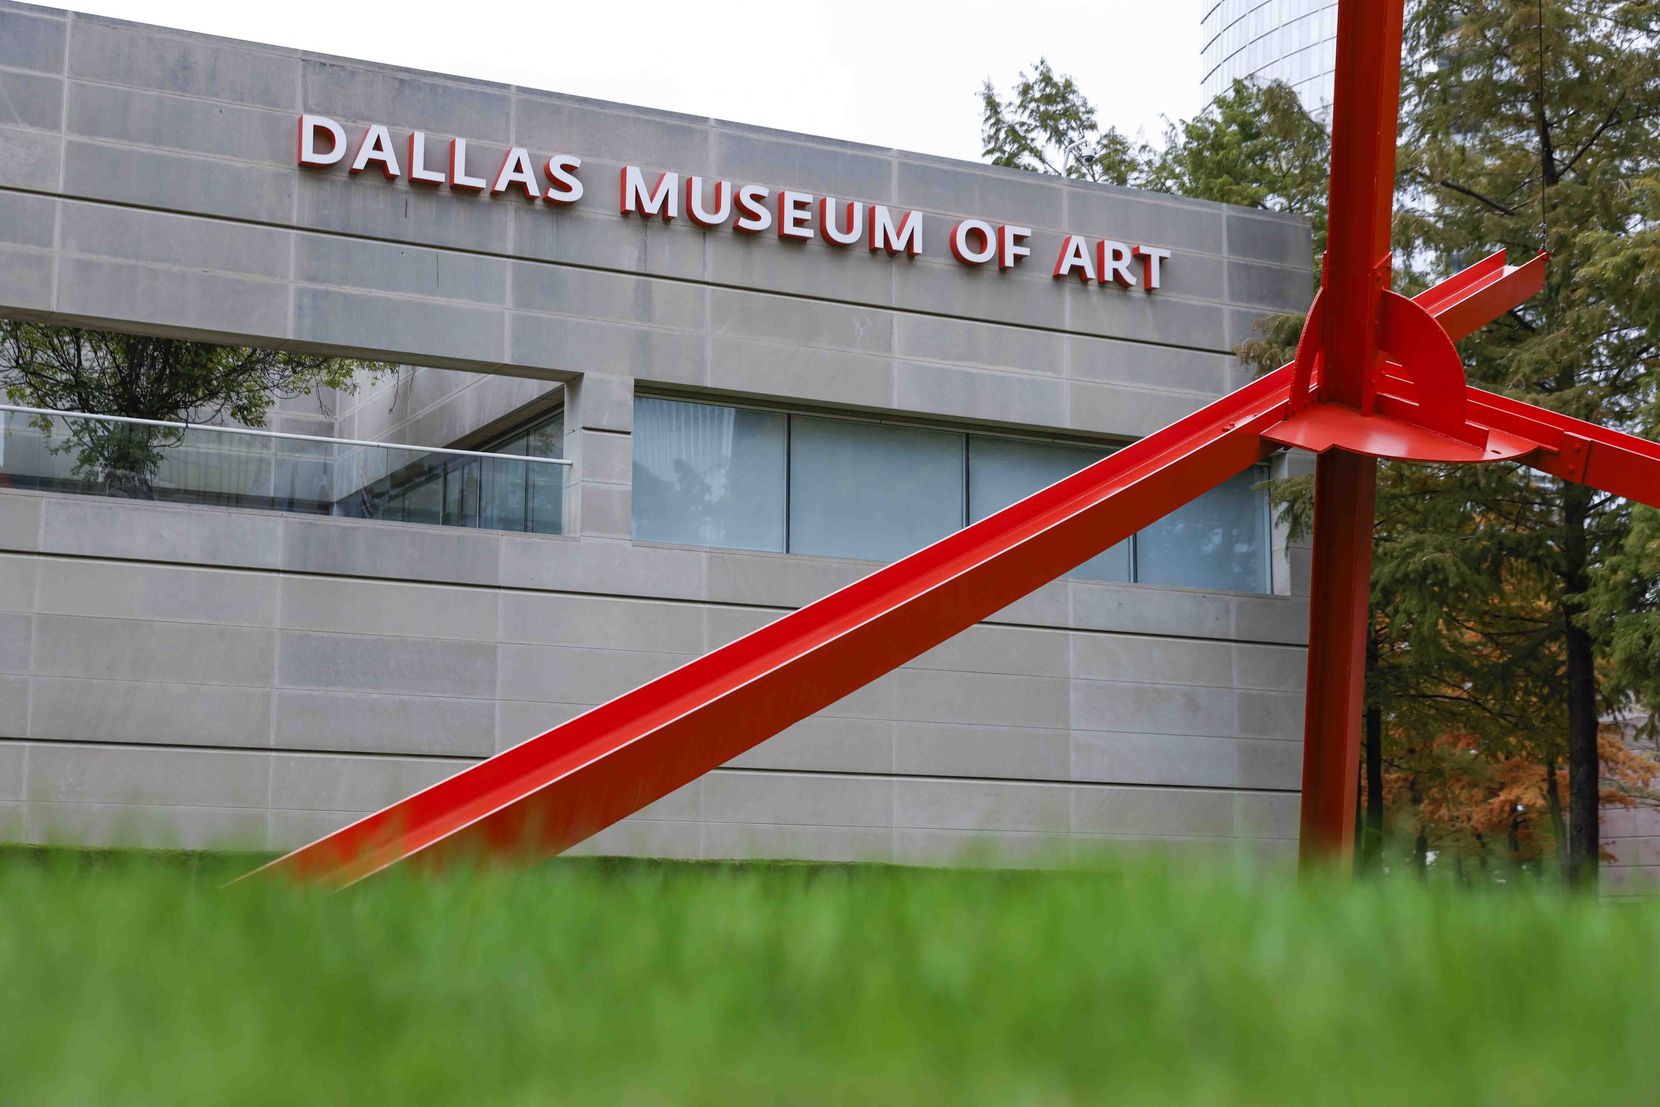 The museum received $1,123,896 from the Dallas Office of Arts and Culture during the 2021-22...